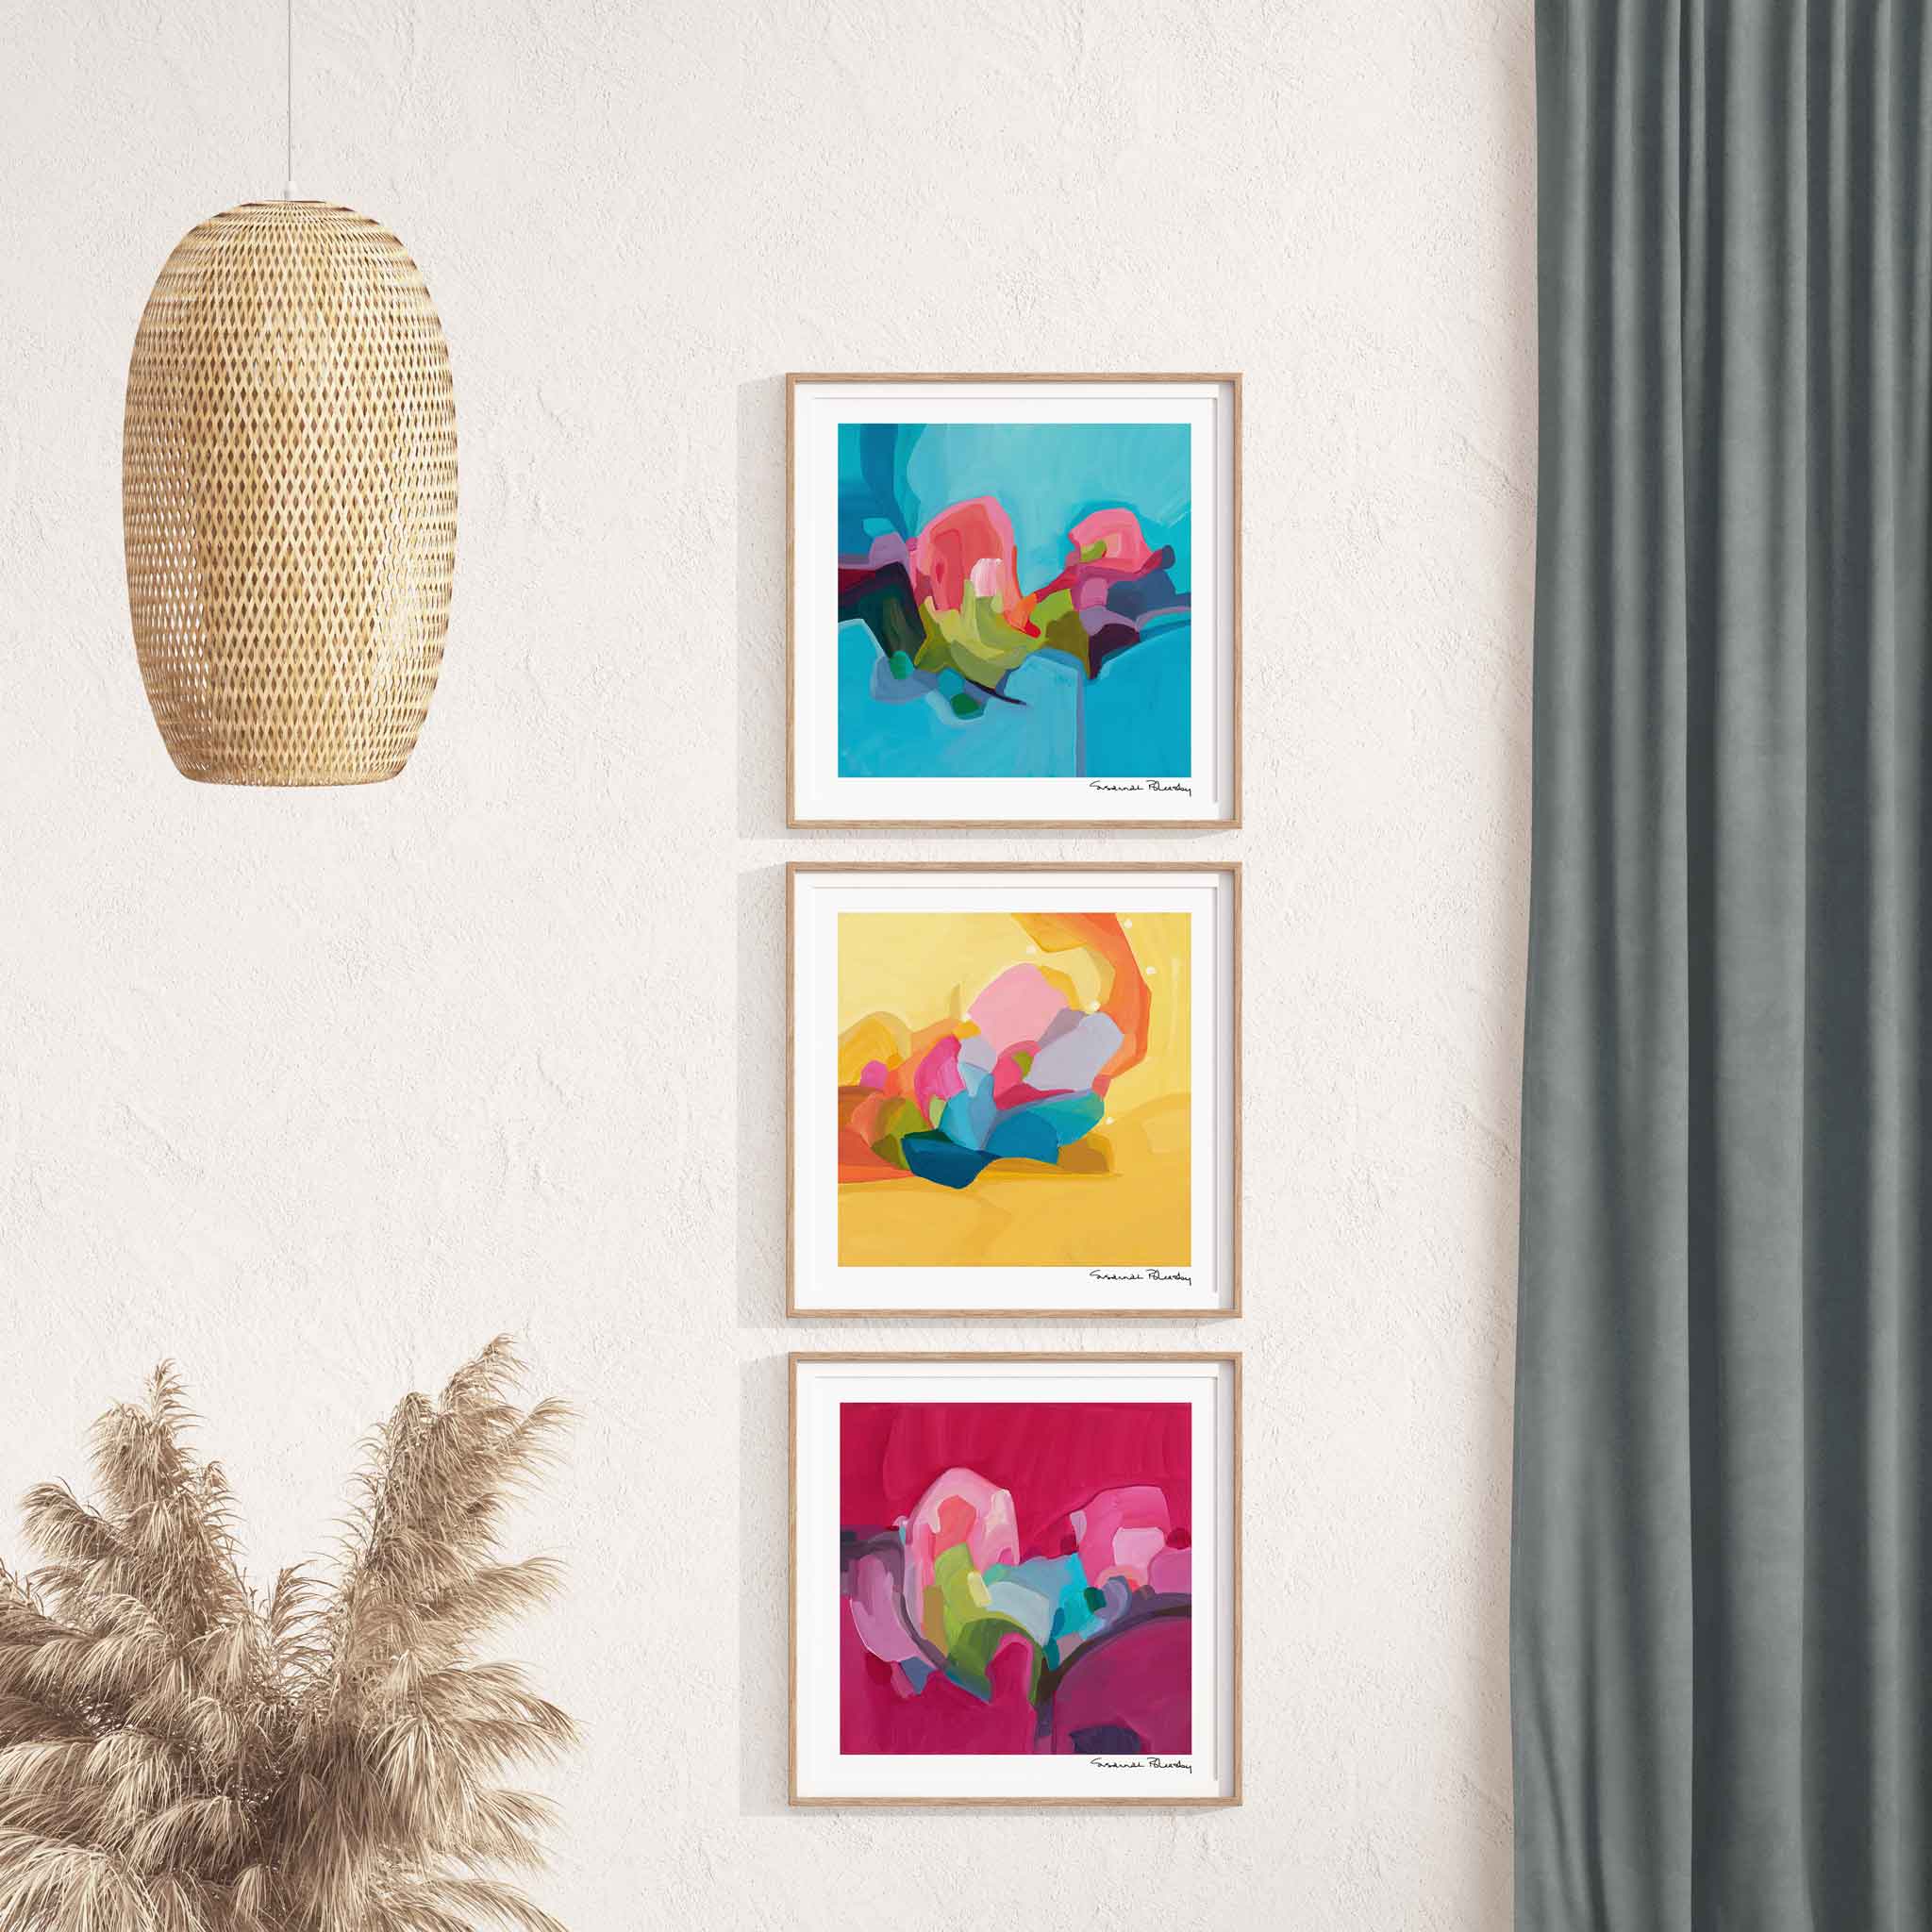 Three colorful abstract art prints by Canadian abstract artist Susannah Bleasby